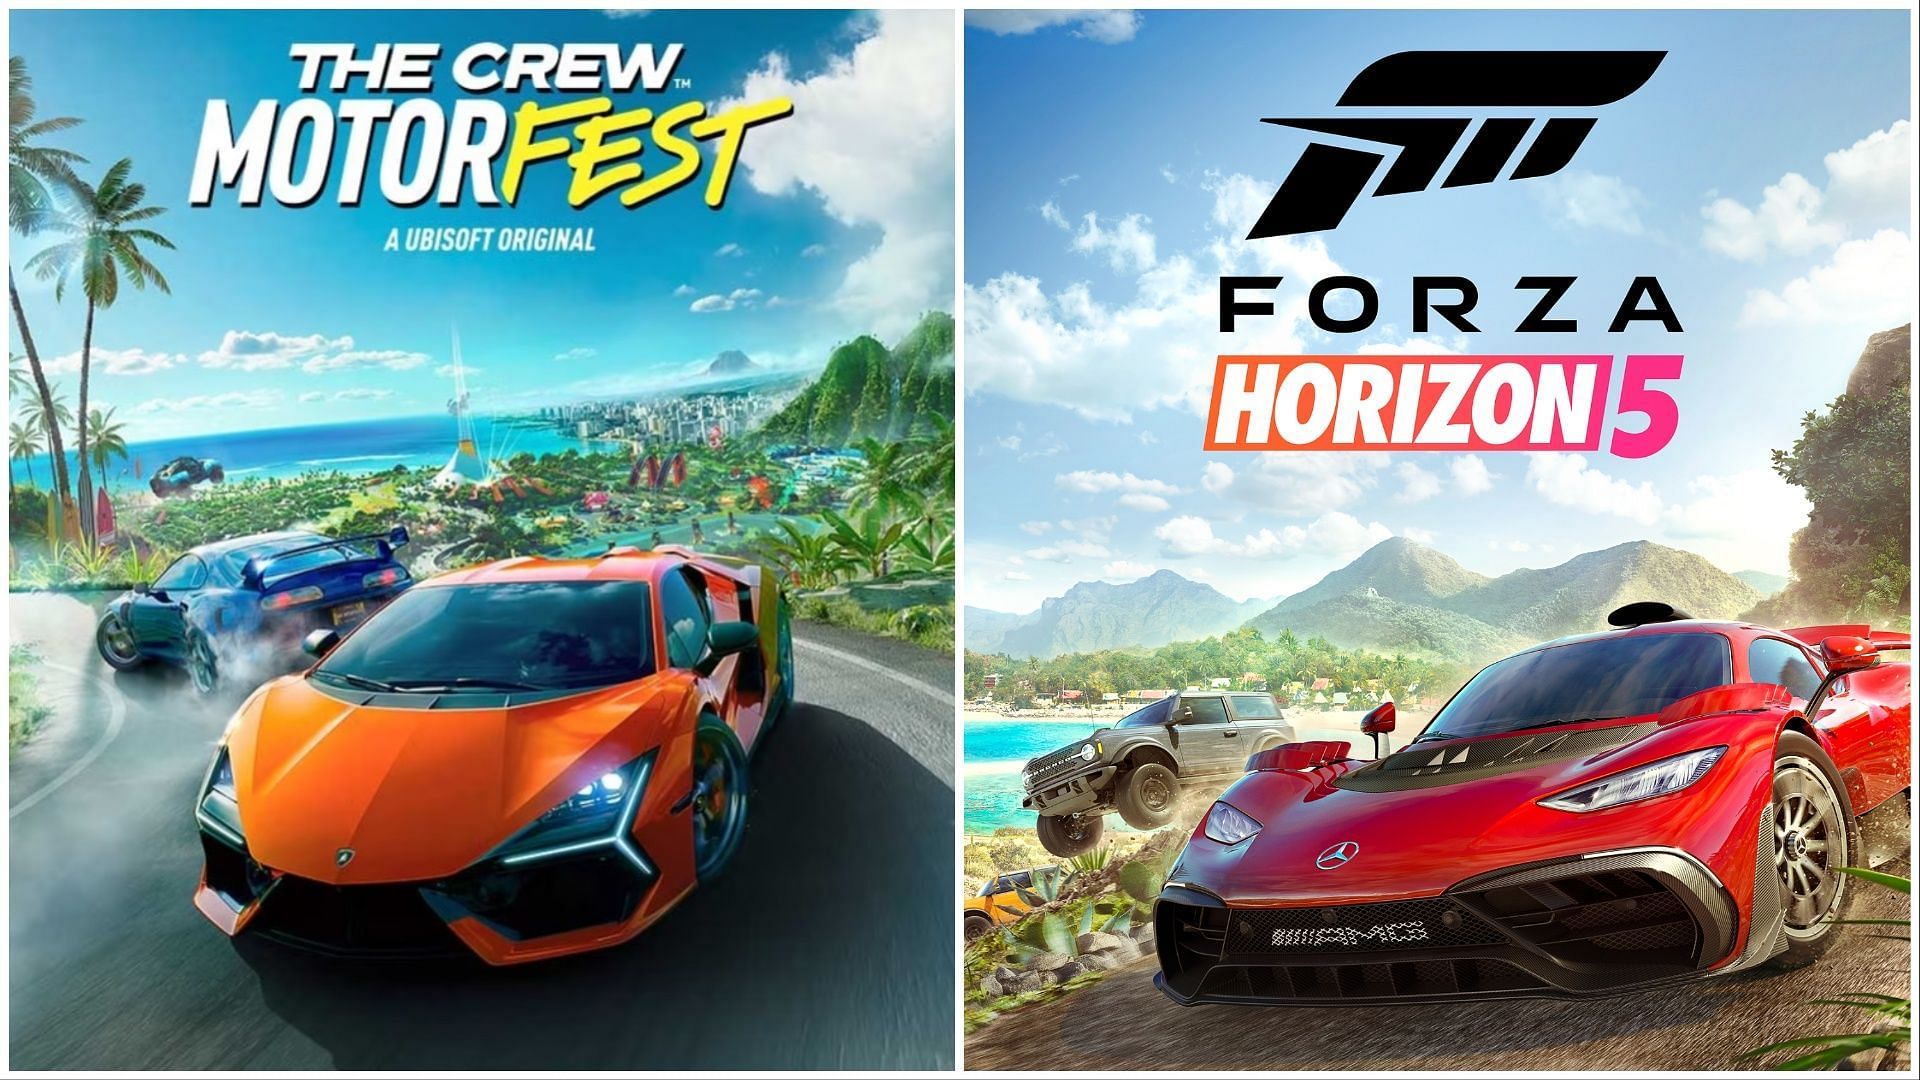 Review: 'Forza Motorsport' and 'Crew Motorfest' benefit from a reset